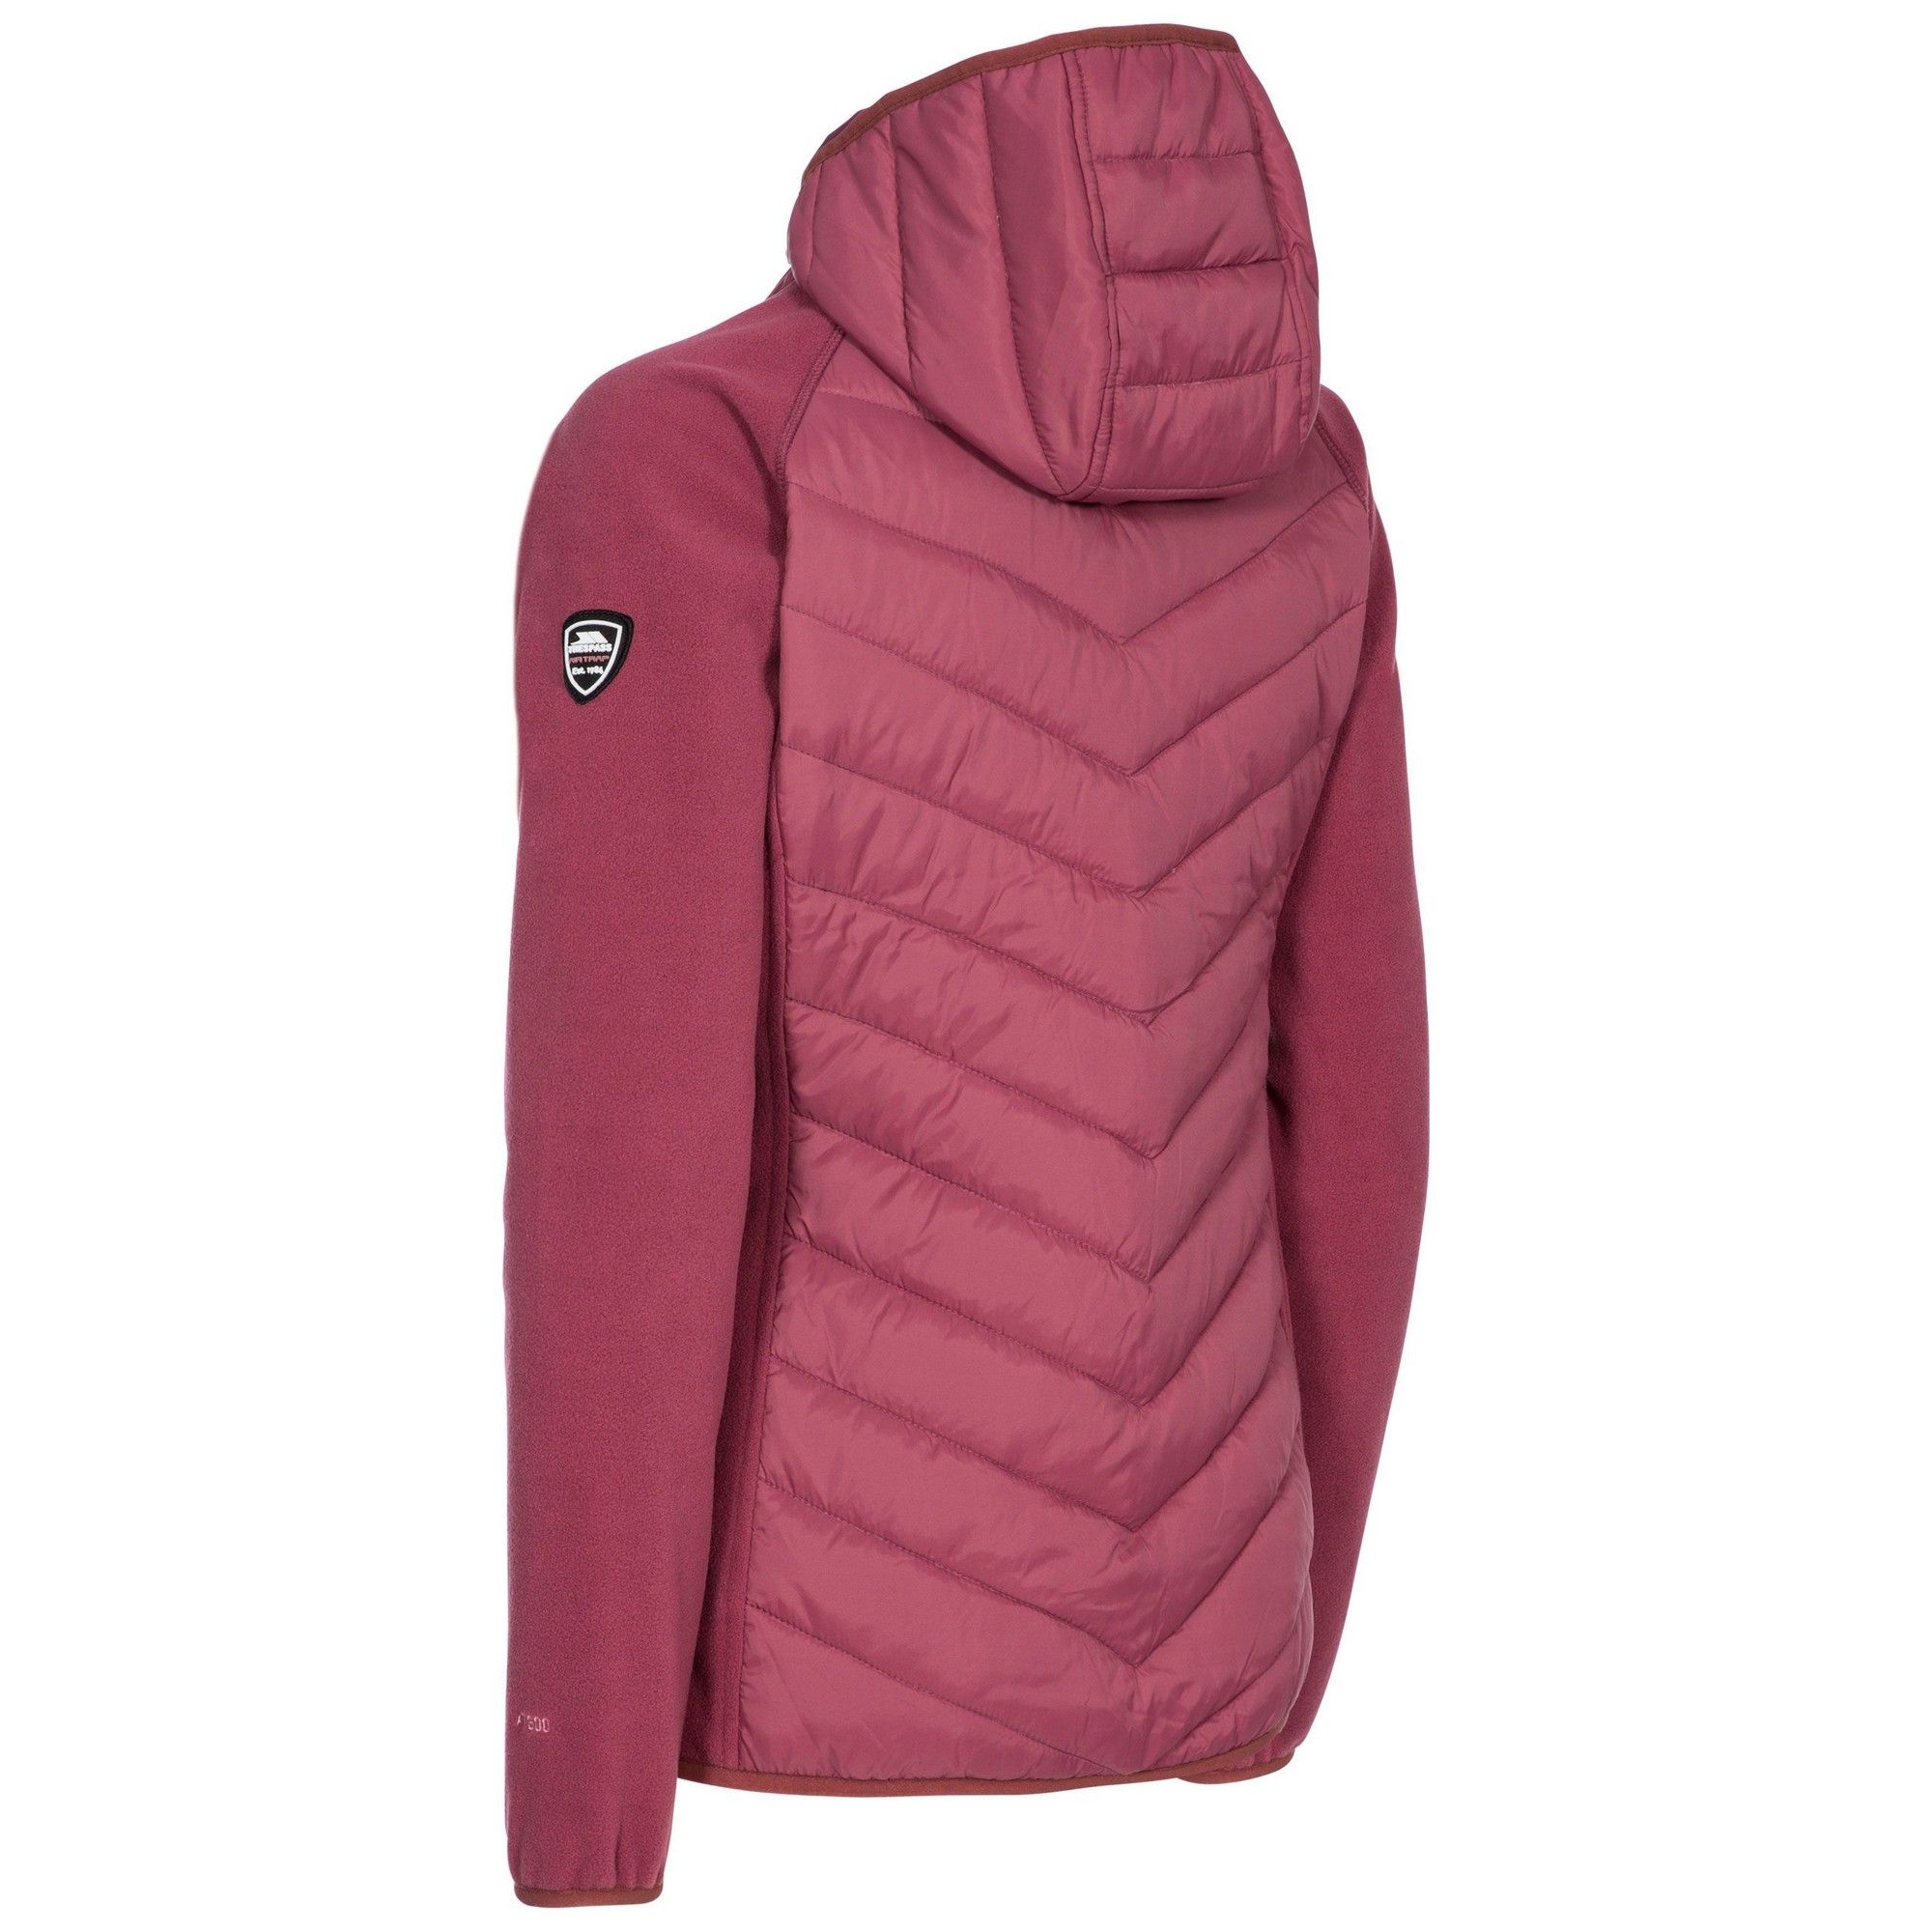 Fleece jacket. Soft touch padded panels. Grown on hood. Chin guard. 2 low profile zip pockets. Stretch binding at edges. 100% Polyester/100% Polyamide. Trespass Womens Chest Sizing (approx): XS/8 - 32in/81cm, S/10 - 34in/86cm, M/12 - 36in/91.4cm, L/14 - 38in/96.5cm, XL/16 - 40in/101.5cm, XXL/18 - 42in/106.5cm.